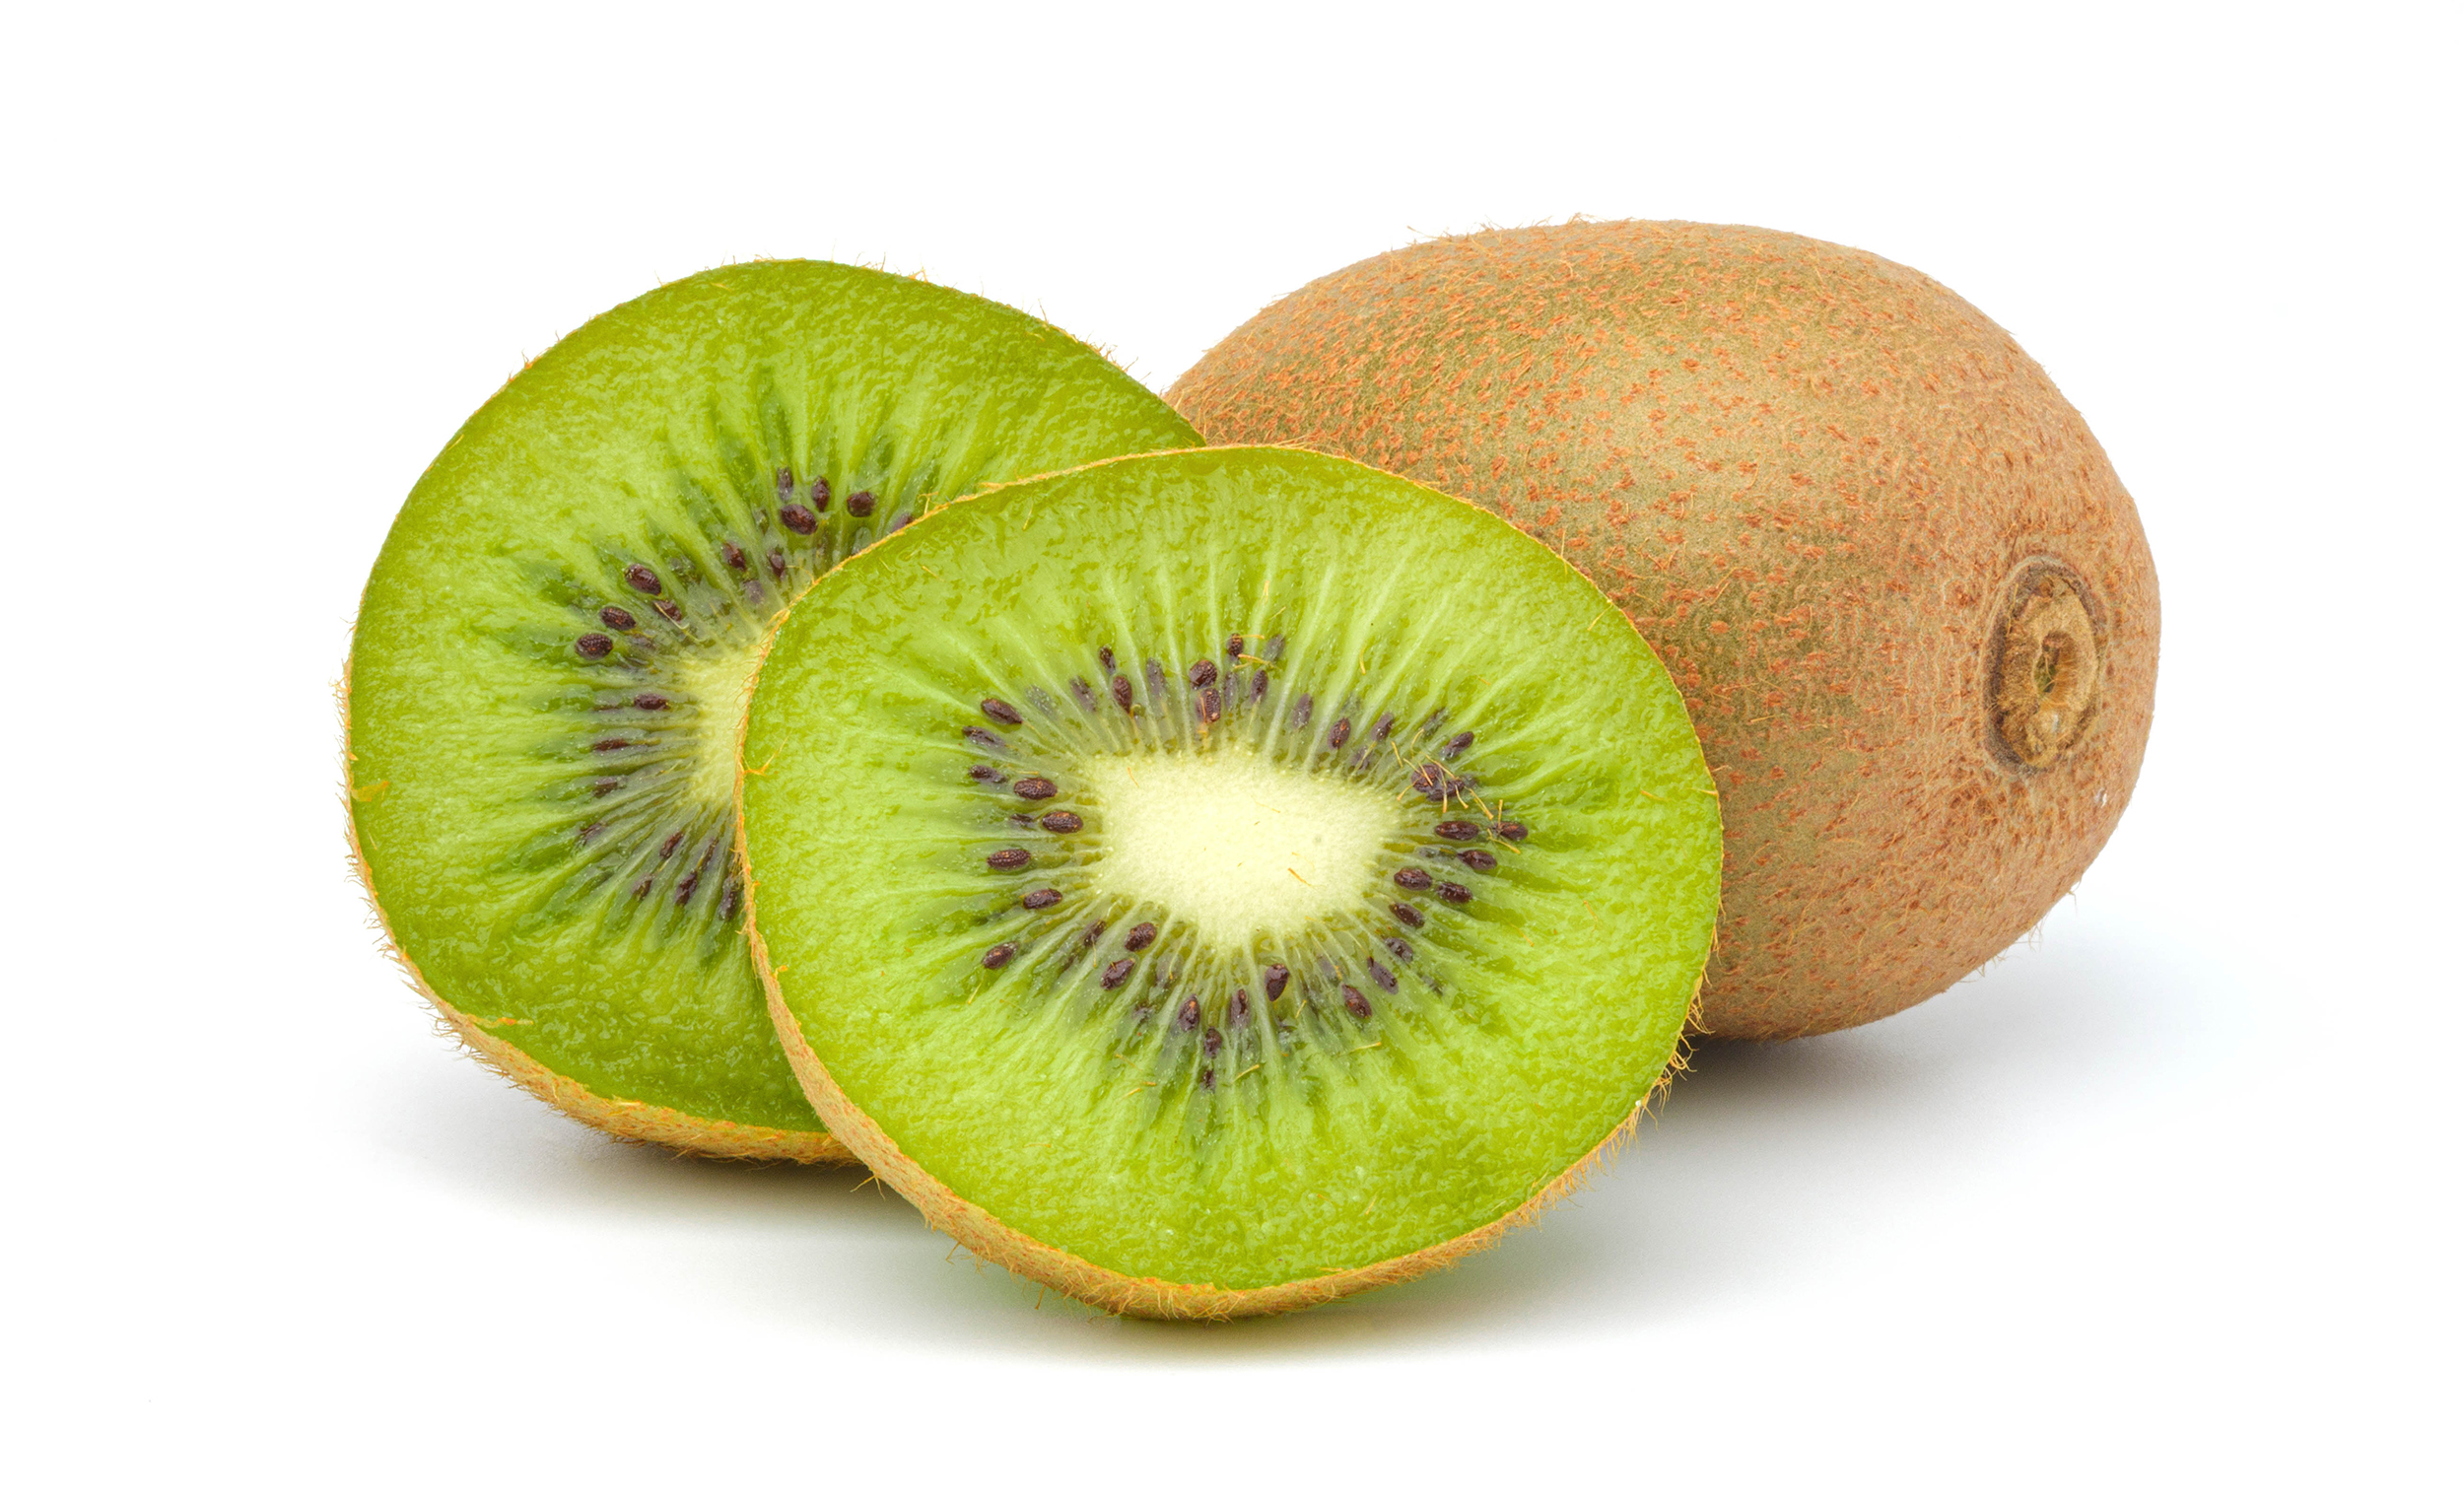 difference-between-gold-kiwi-fruit-and-green-kiwi-fruit